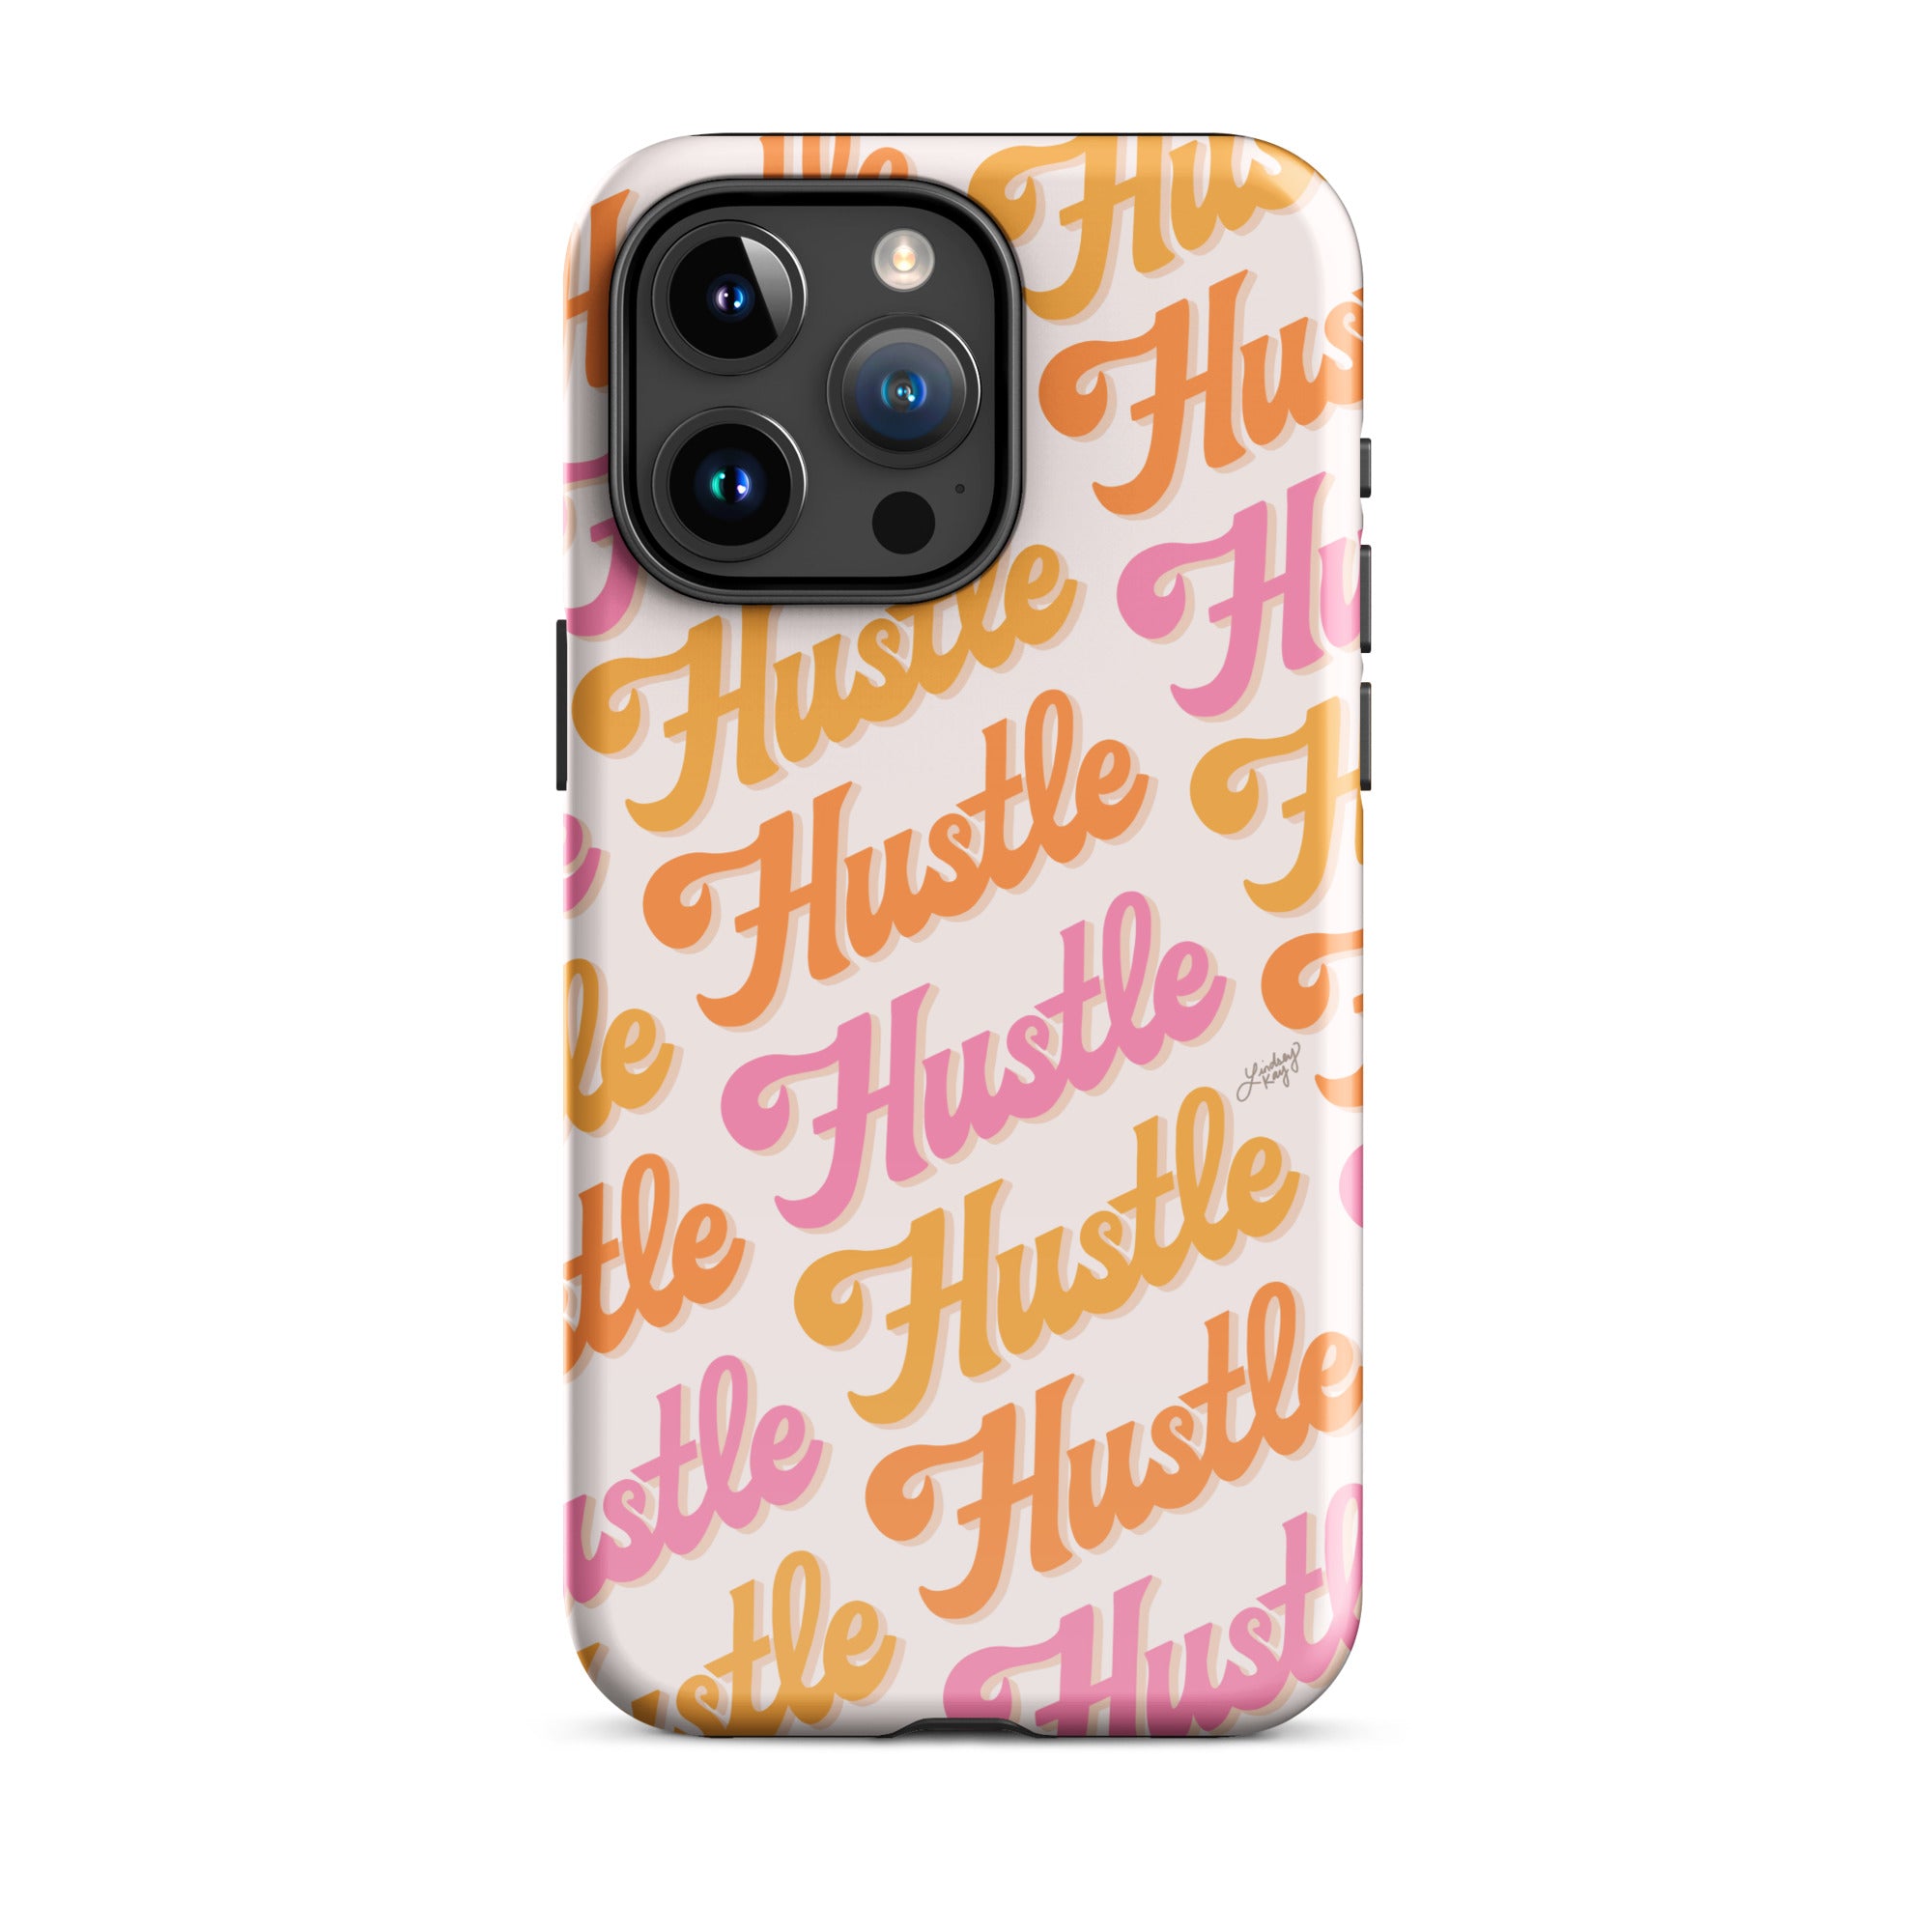 hustle boss babe pink orange yellow gift iphone-15 iphone phone case cover durable tough lindsey kay collective